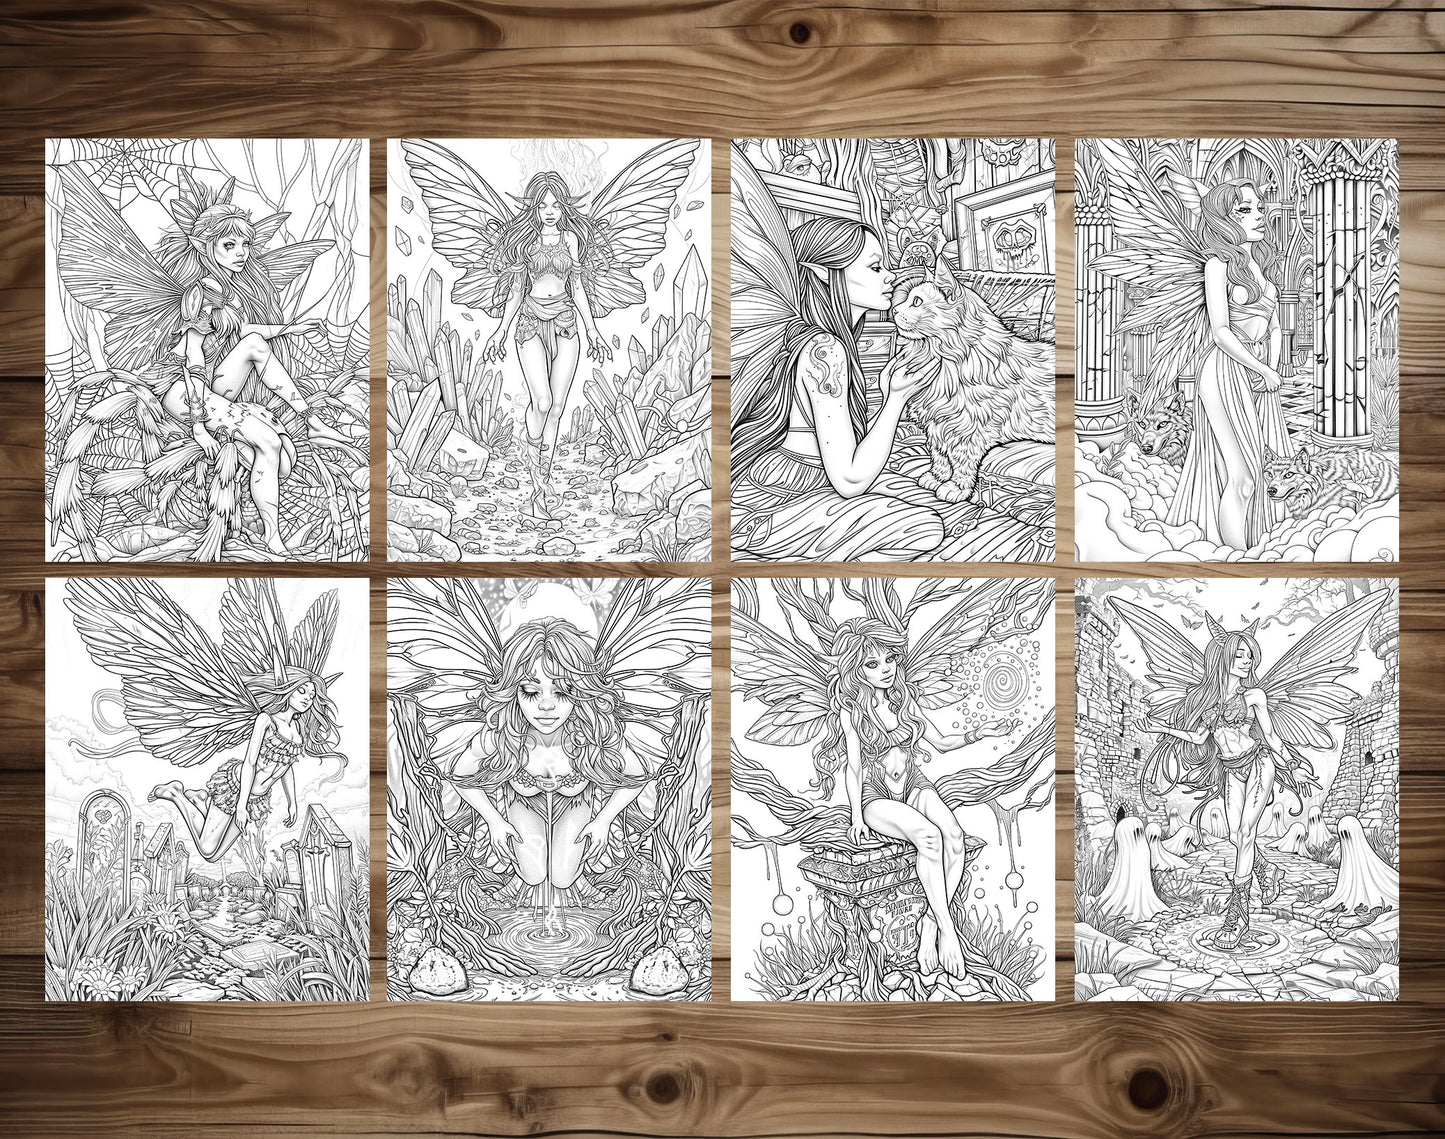 60 Dark Fairies 2 Coloring Pages  - Instant Download - Printable PDF